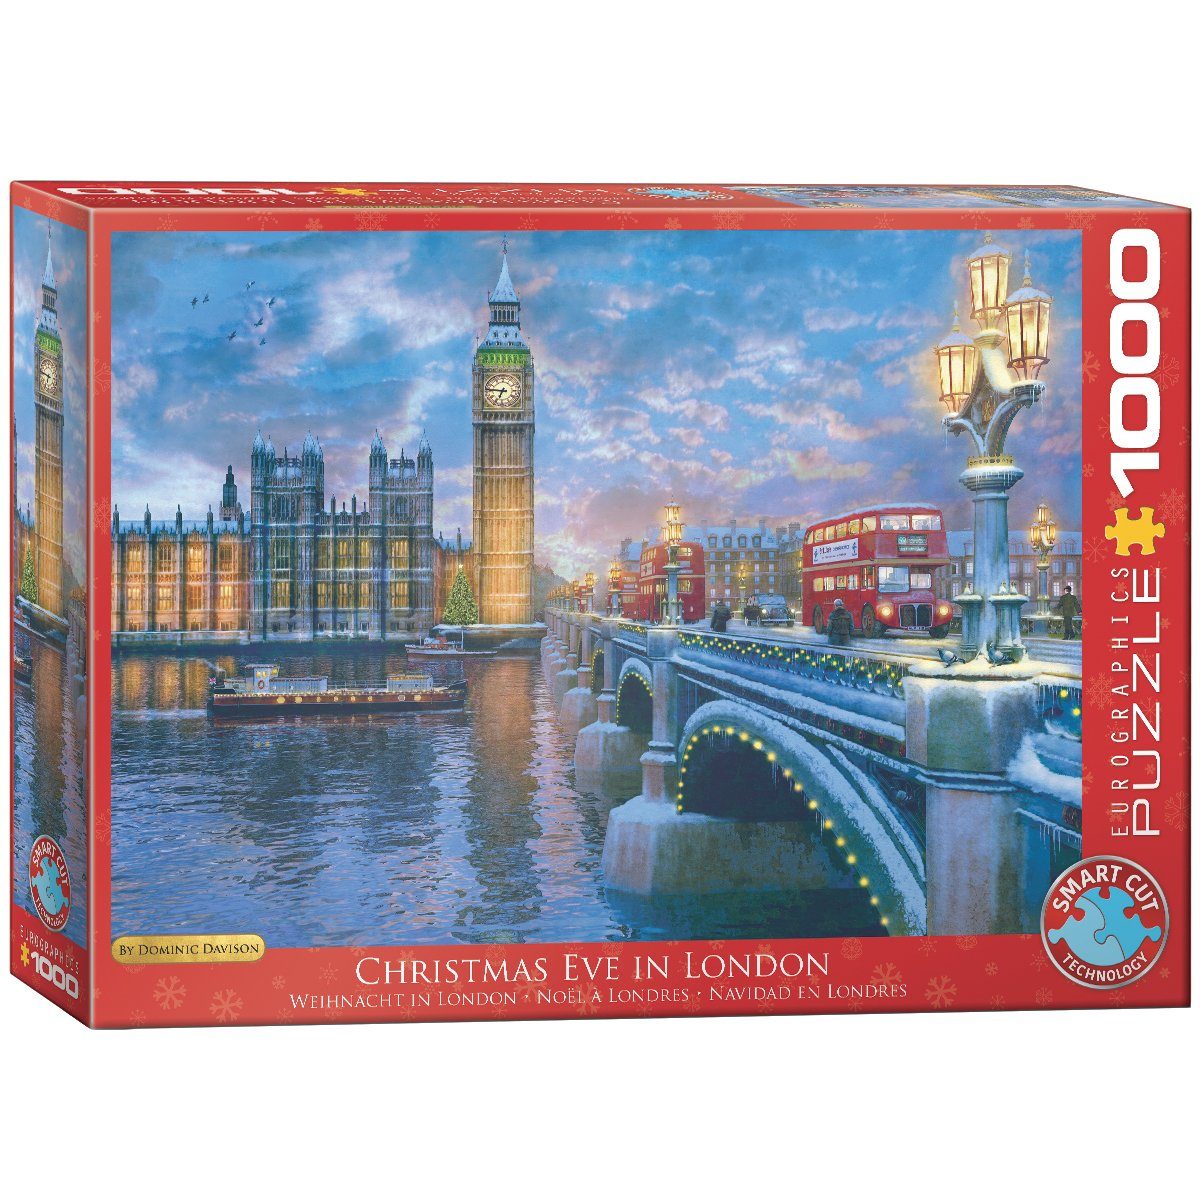 EUROGRAPHICS Puzzle Dominic Davison Weihnacht Puzzle, in Made 1000 in Europe Puzzleteile, London